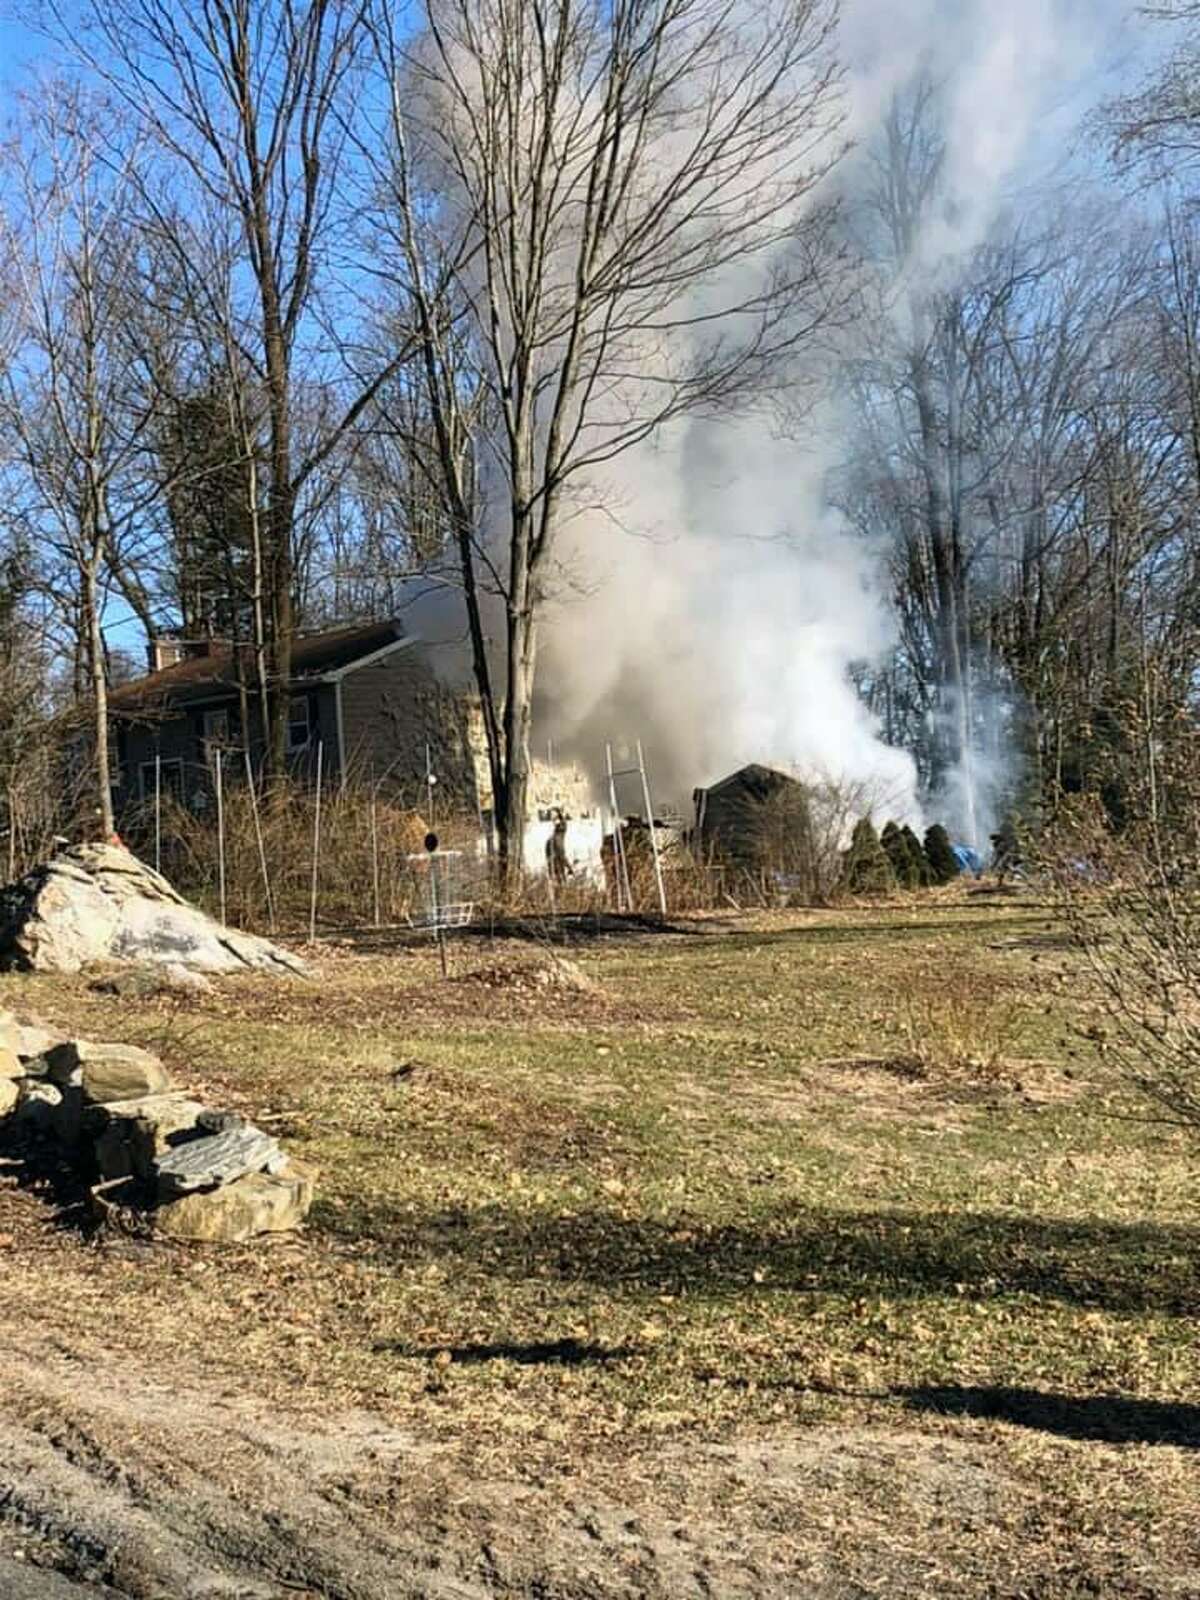 Firefighters extinguished a boat and shed fire in New Milford, Conn., on Jan. 11, 2019.